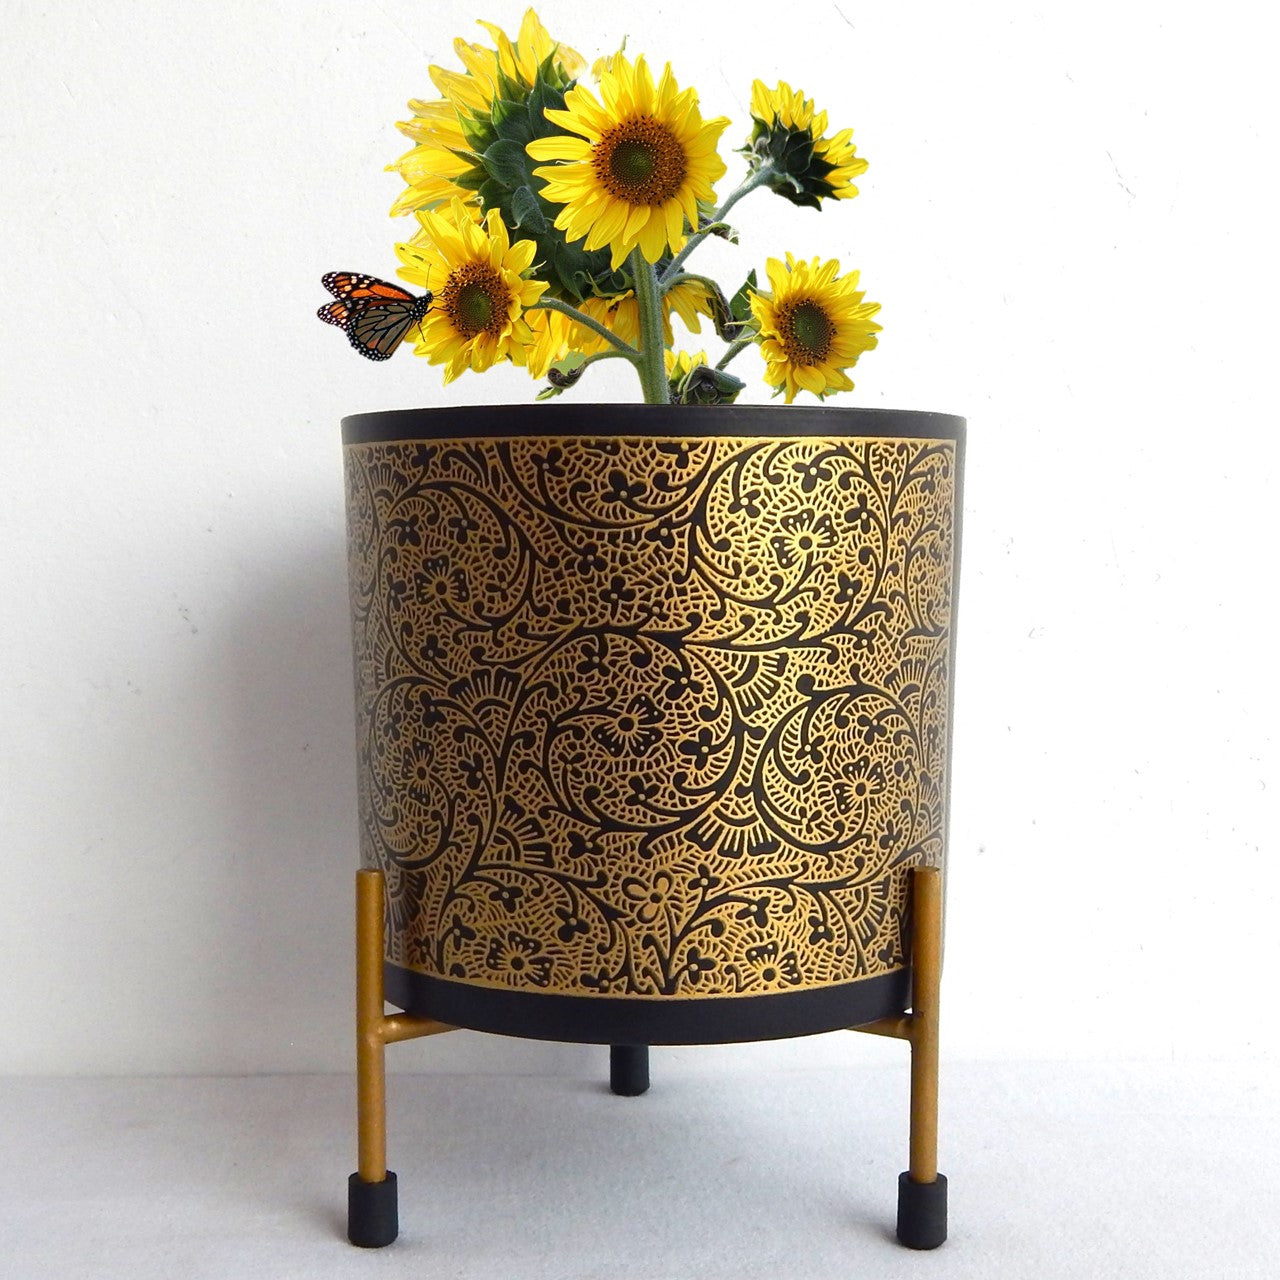 ecofynd 5 inches Alan Black Metal Planter Pot with Gold Stand Planter freeshipping - Ecofynd